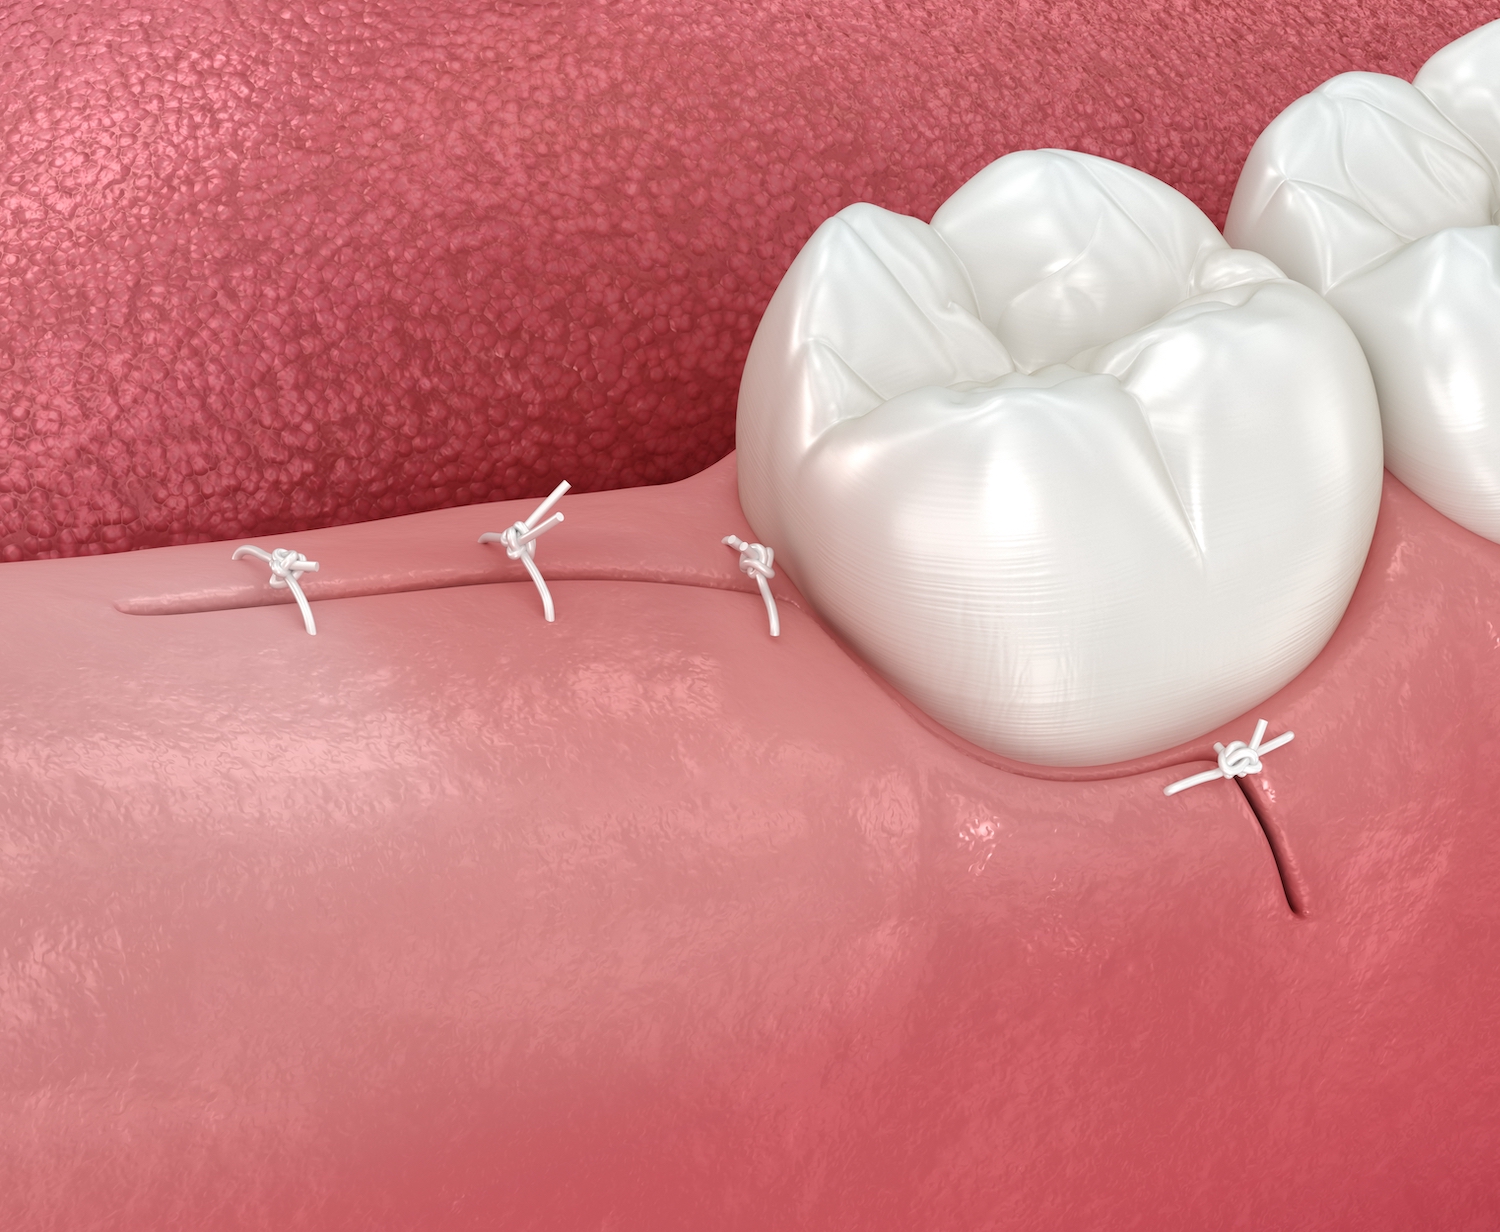 post op care for wisdom teeth removal, stitches, 3d medically accurate image of extraction site after wisdom tooth extraction